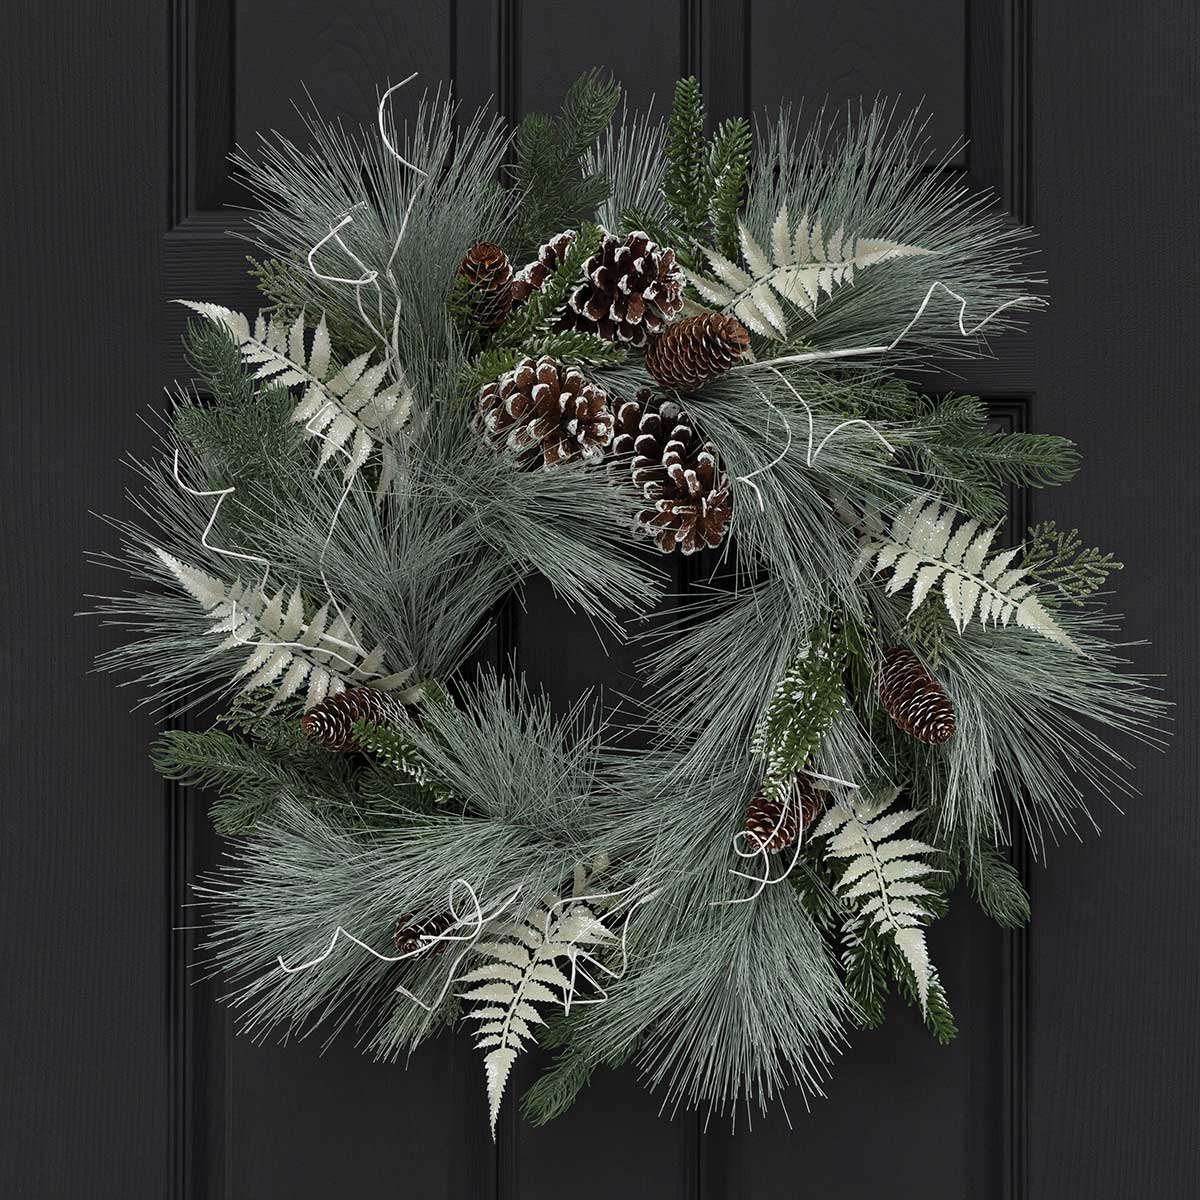 WREATH WINTER PINE WITH PINECONES 24IN (INNER RING 9IN)